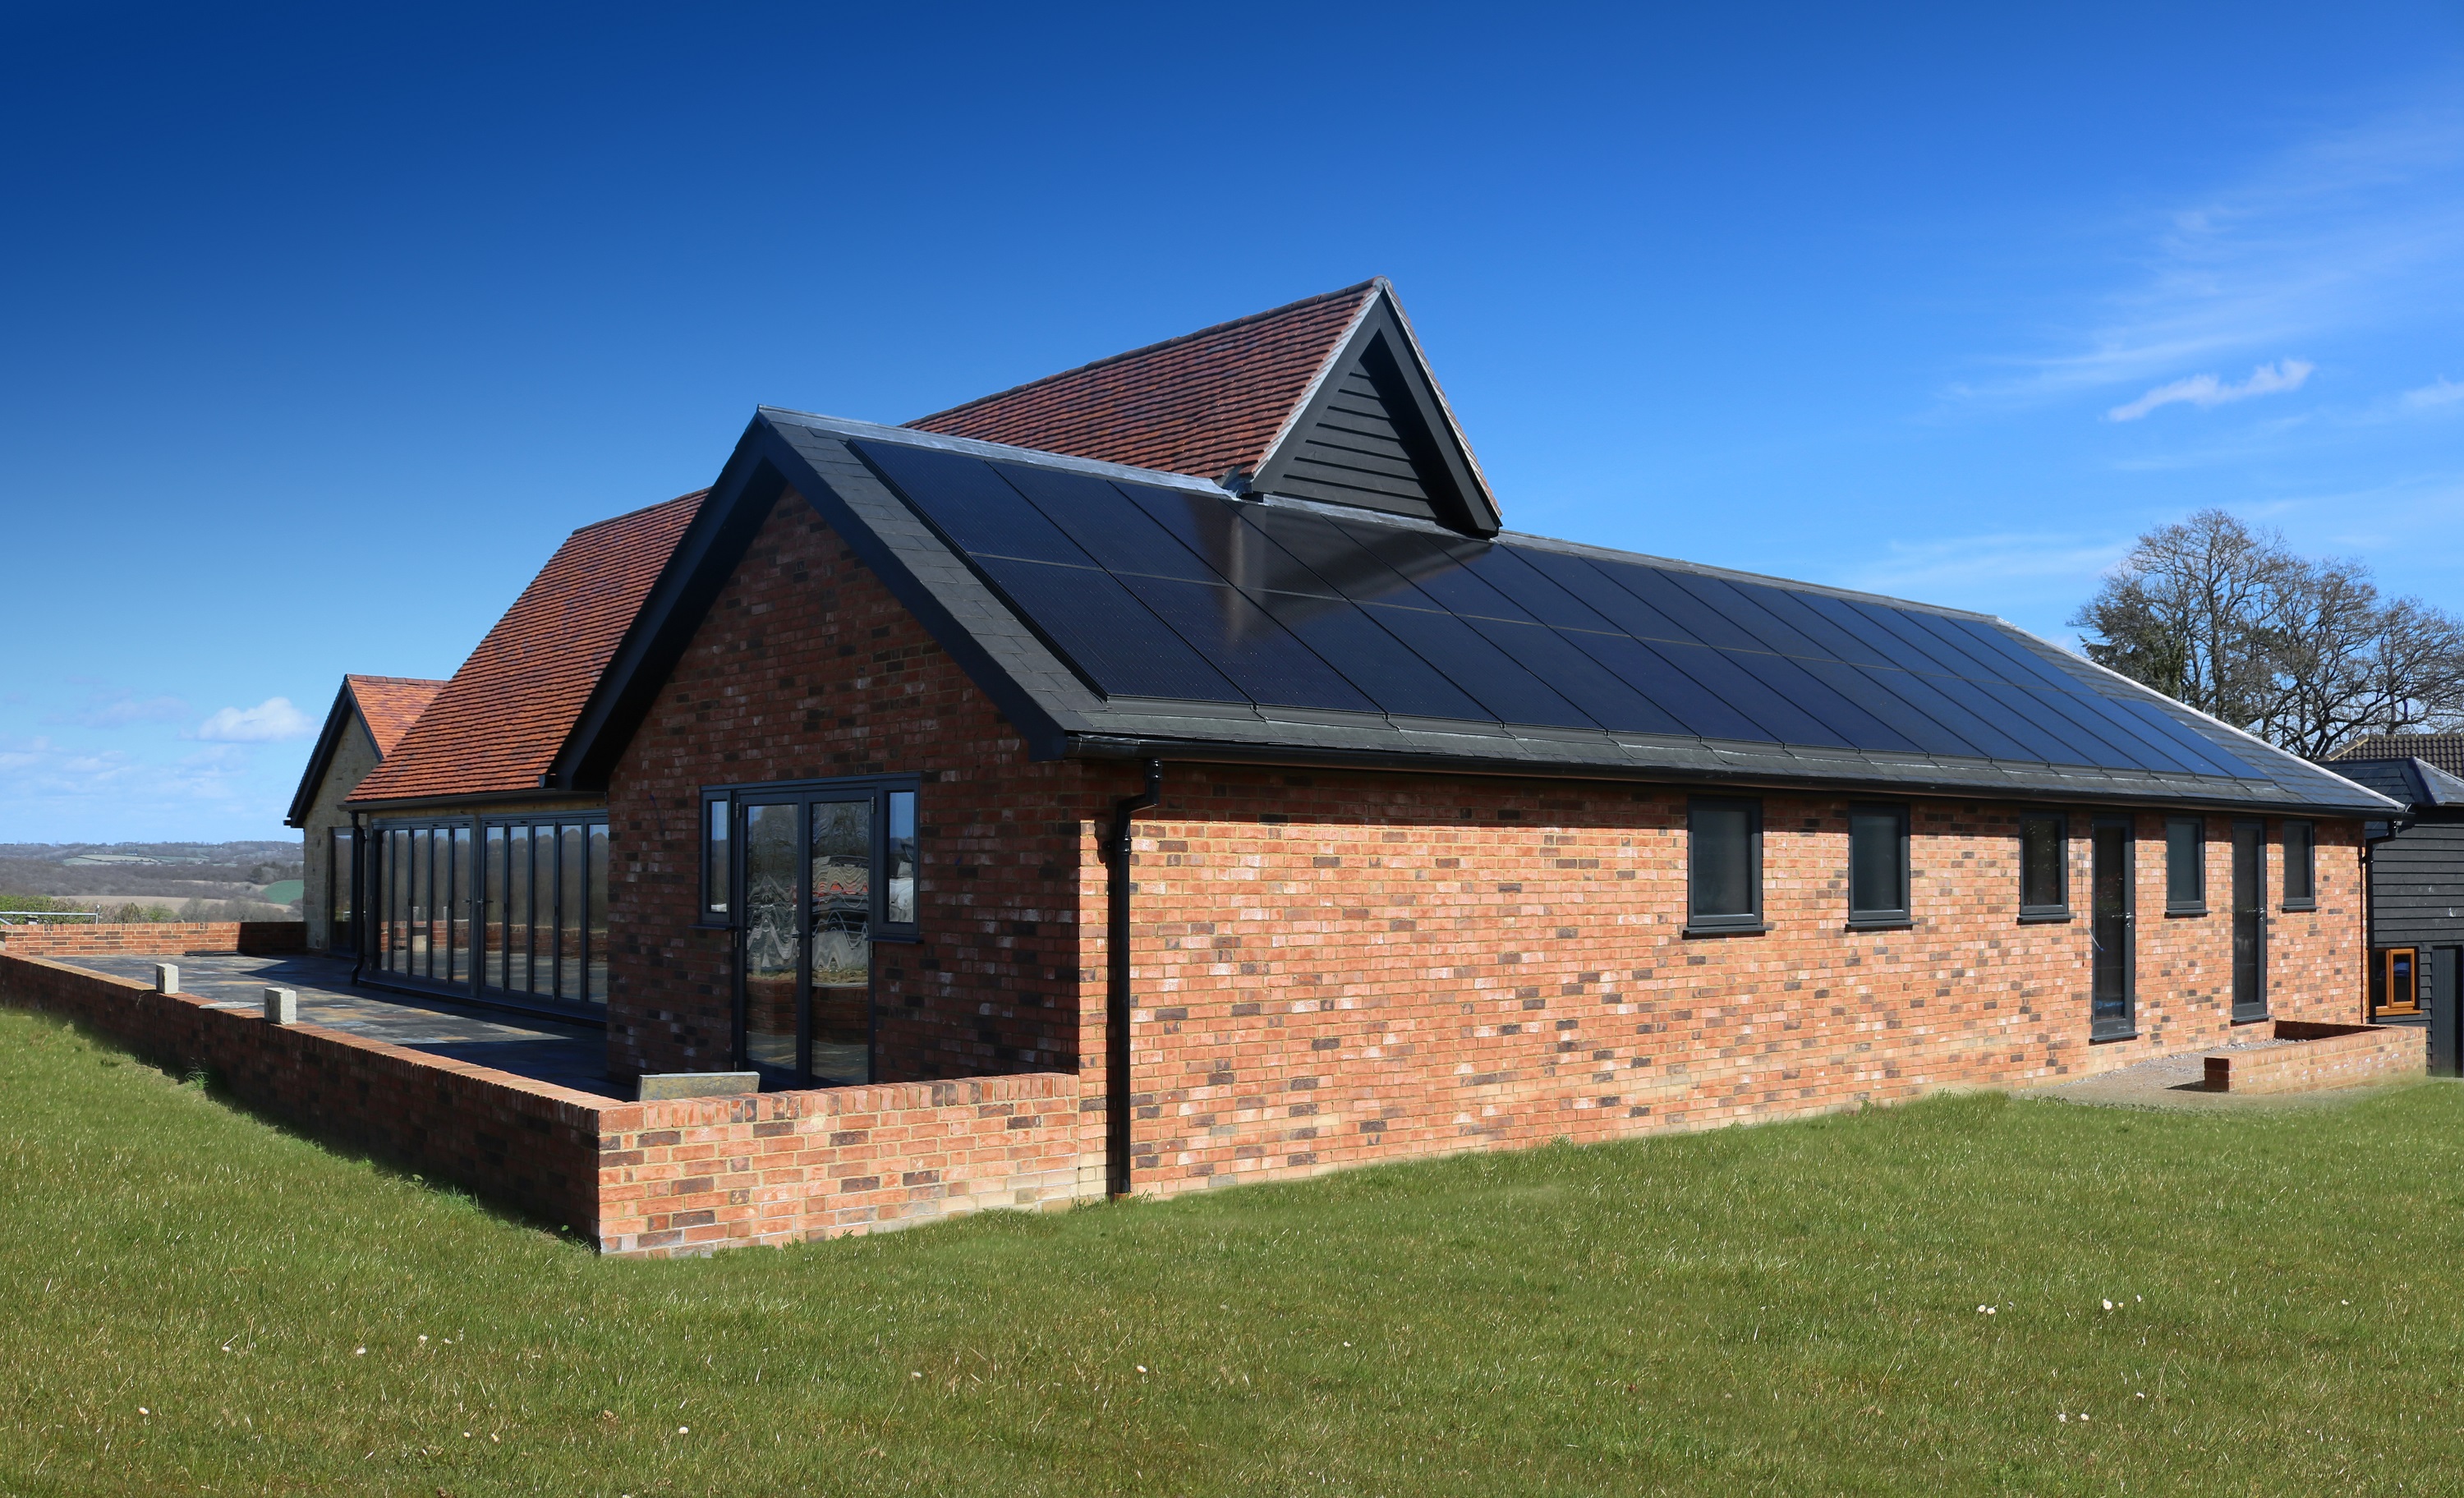 Supporting Net Zero Ambitions: Solar PV Enhancement